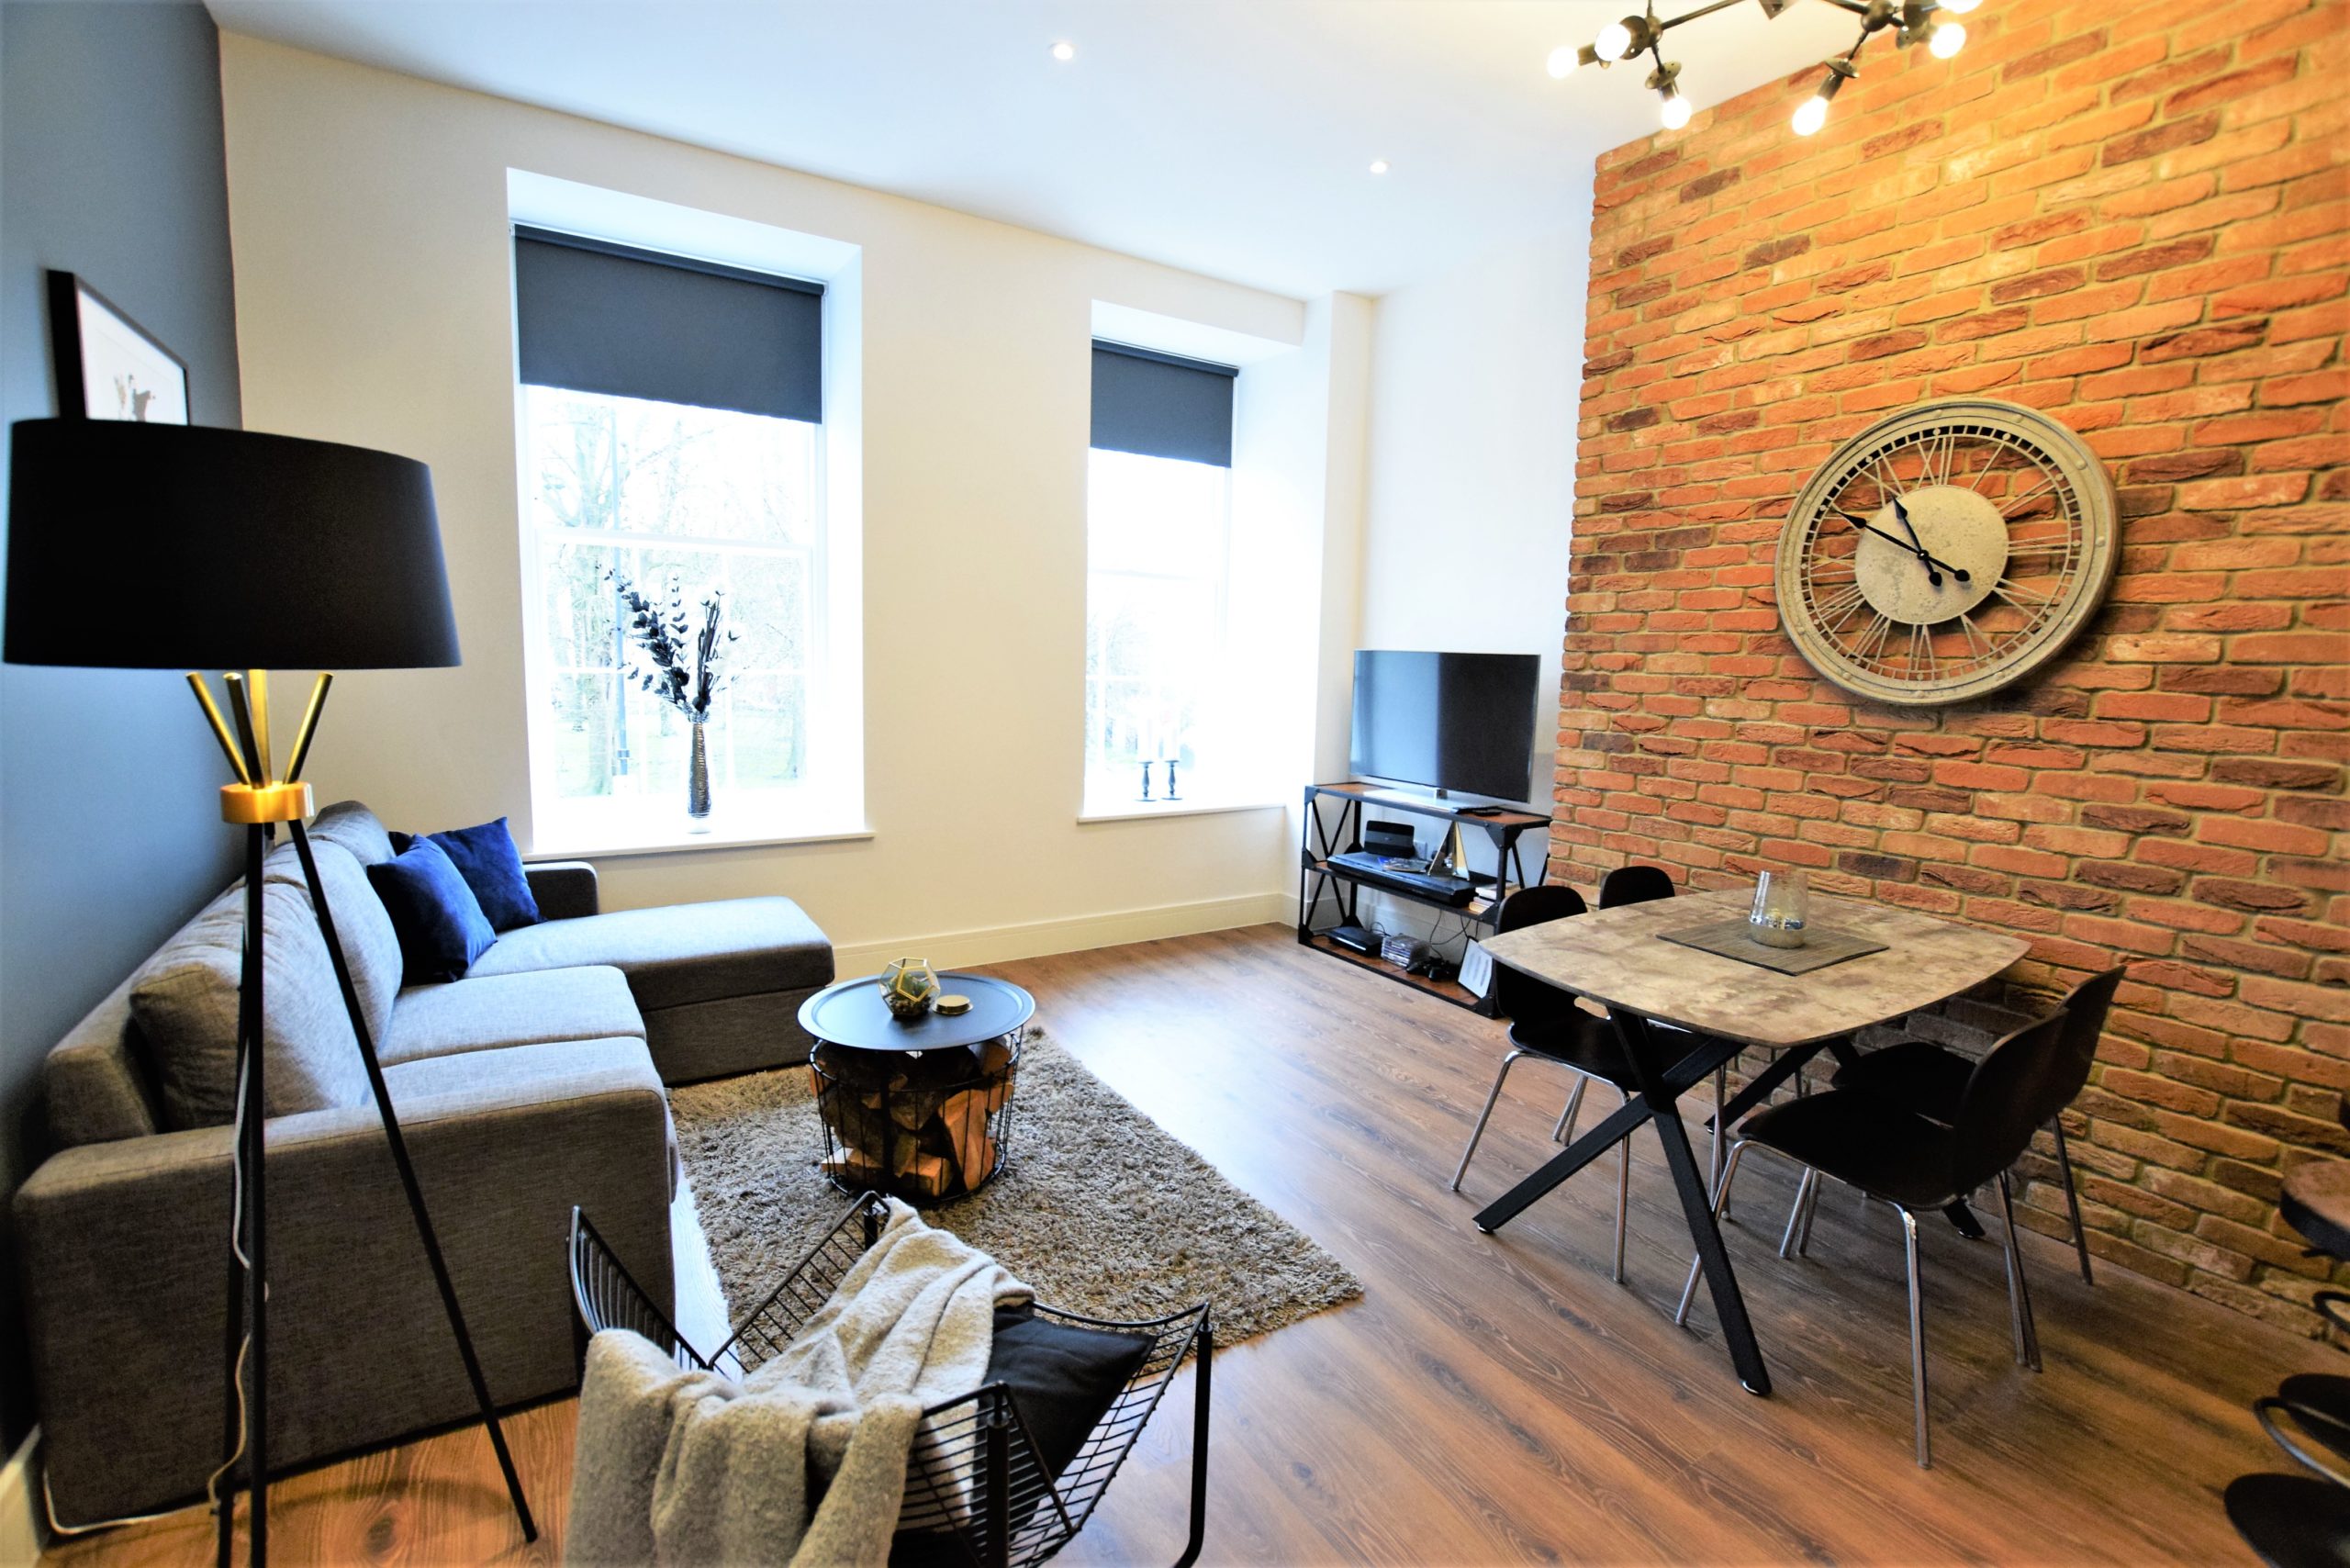 The Hubert - 2 bed - Serviced Apartments near Cabot Circus, Bristol